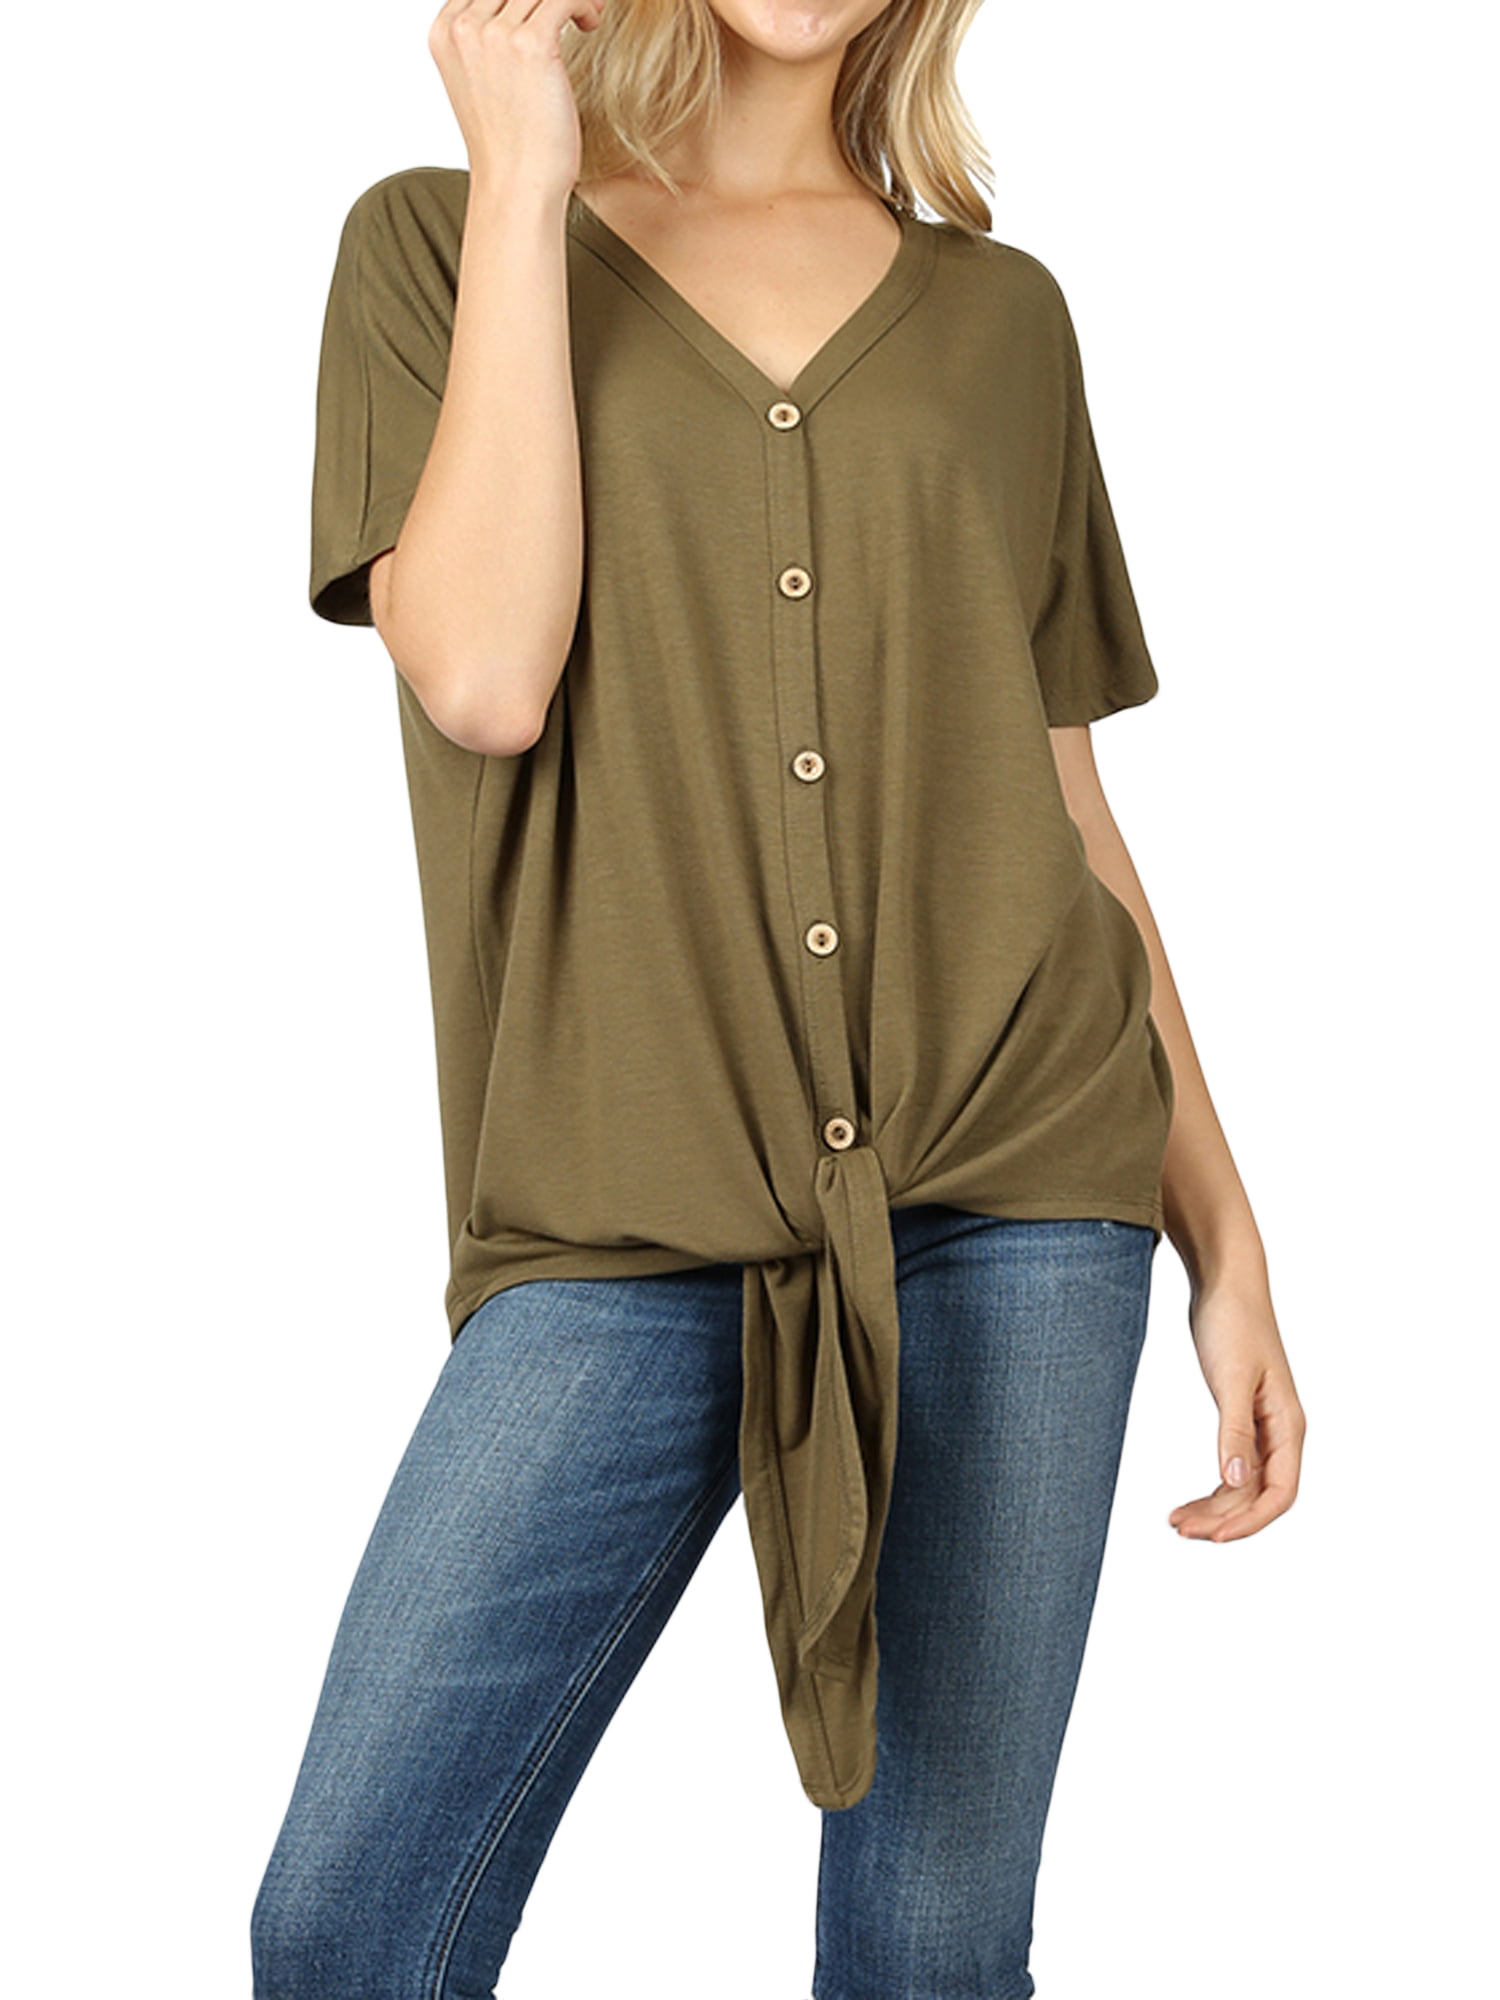 Casual O Neck Tops Short Sleeve Blouses Knot Tie Front Loose Tee T-Shirt for Women 